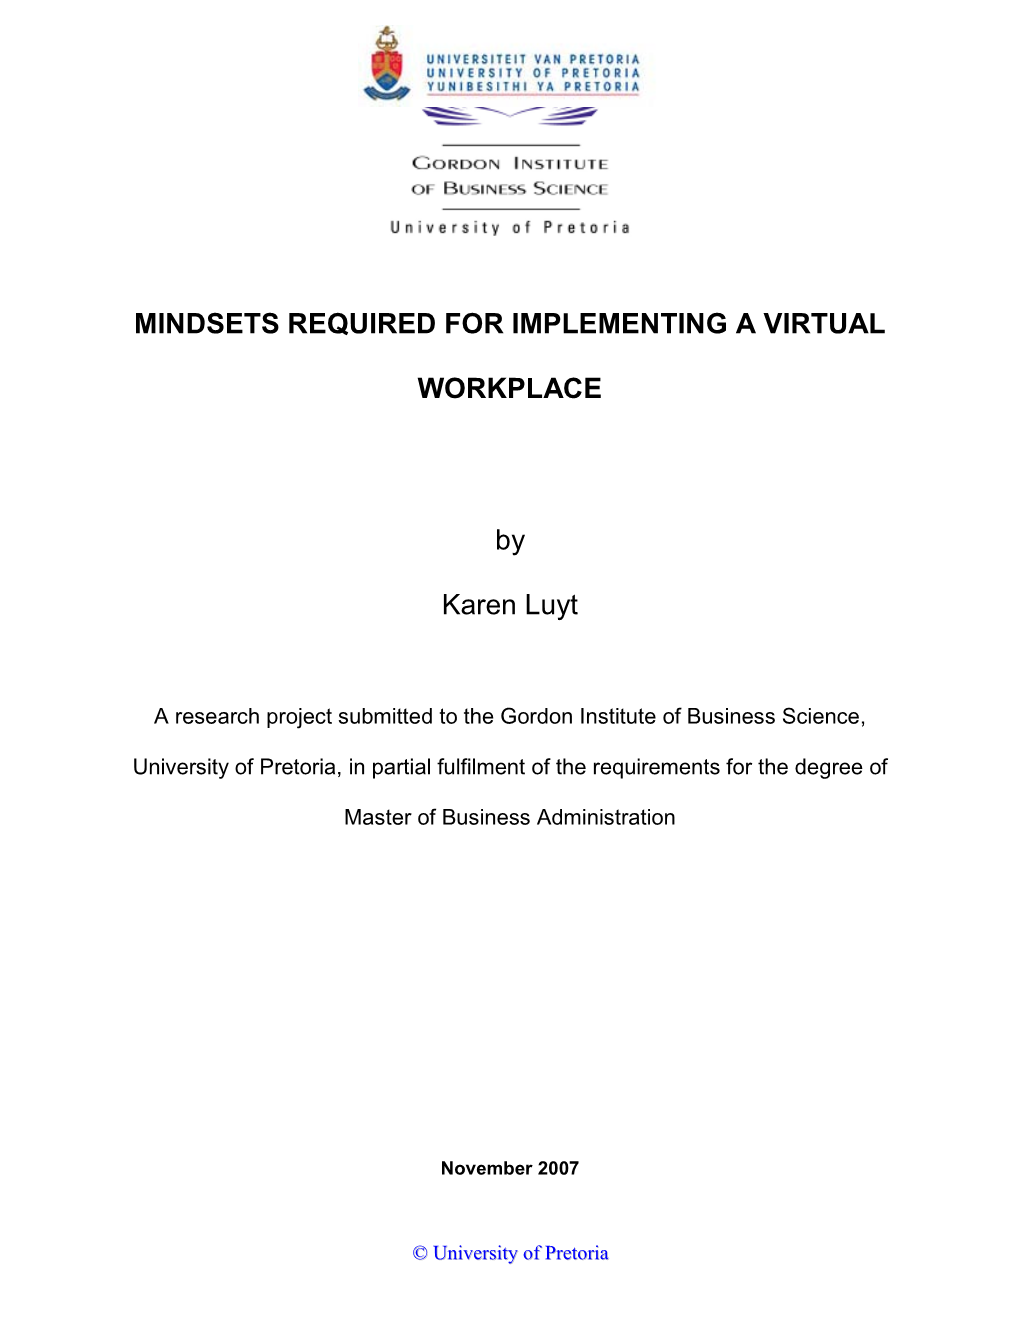 Mindsets Required for Implementing a Virtual